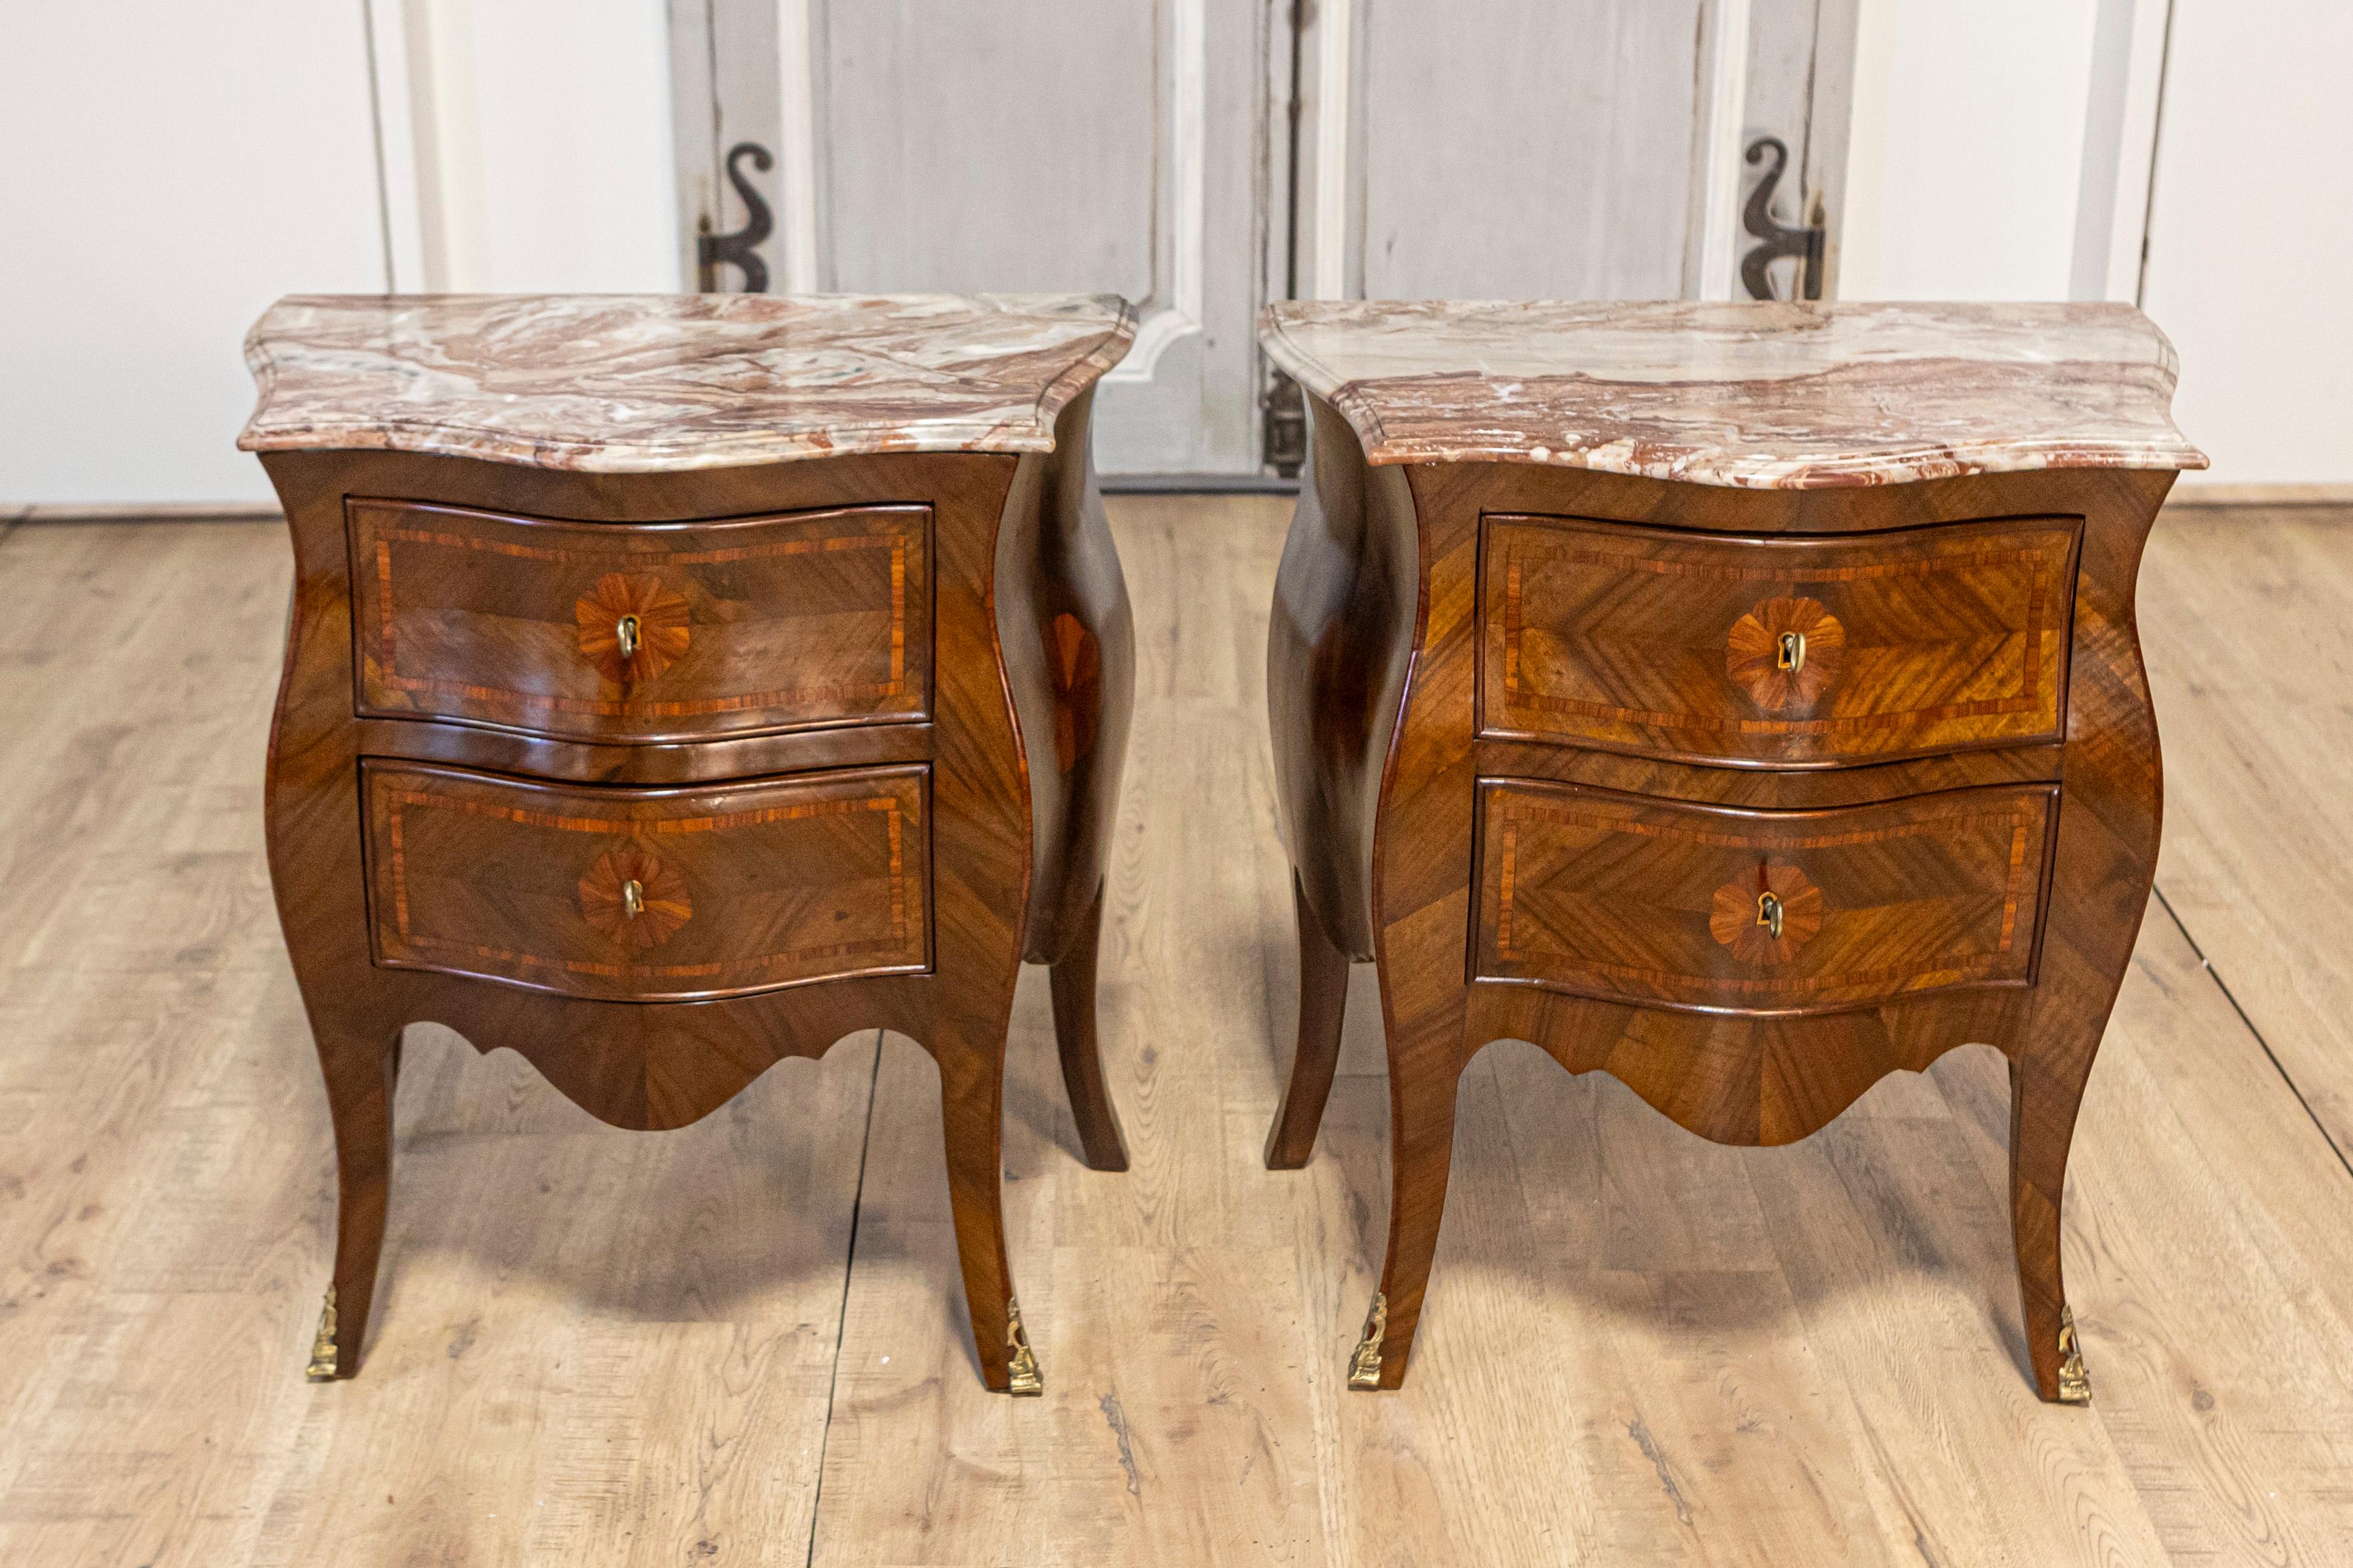 A pair of Italian Rococo style bombé walnut bedside tables from circa 1900 with marble tops and carved aprons. This elegant pair of Italian Rococo style bombé bedside tables from circa 1900 is an exemplary addition to any refined bedroom setting.